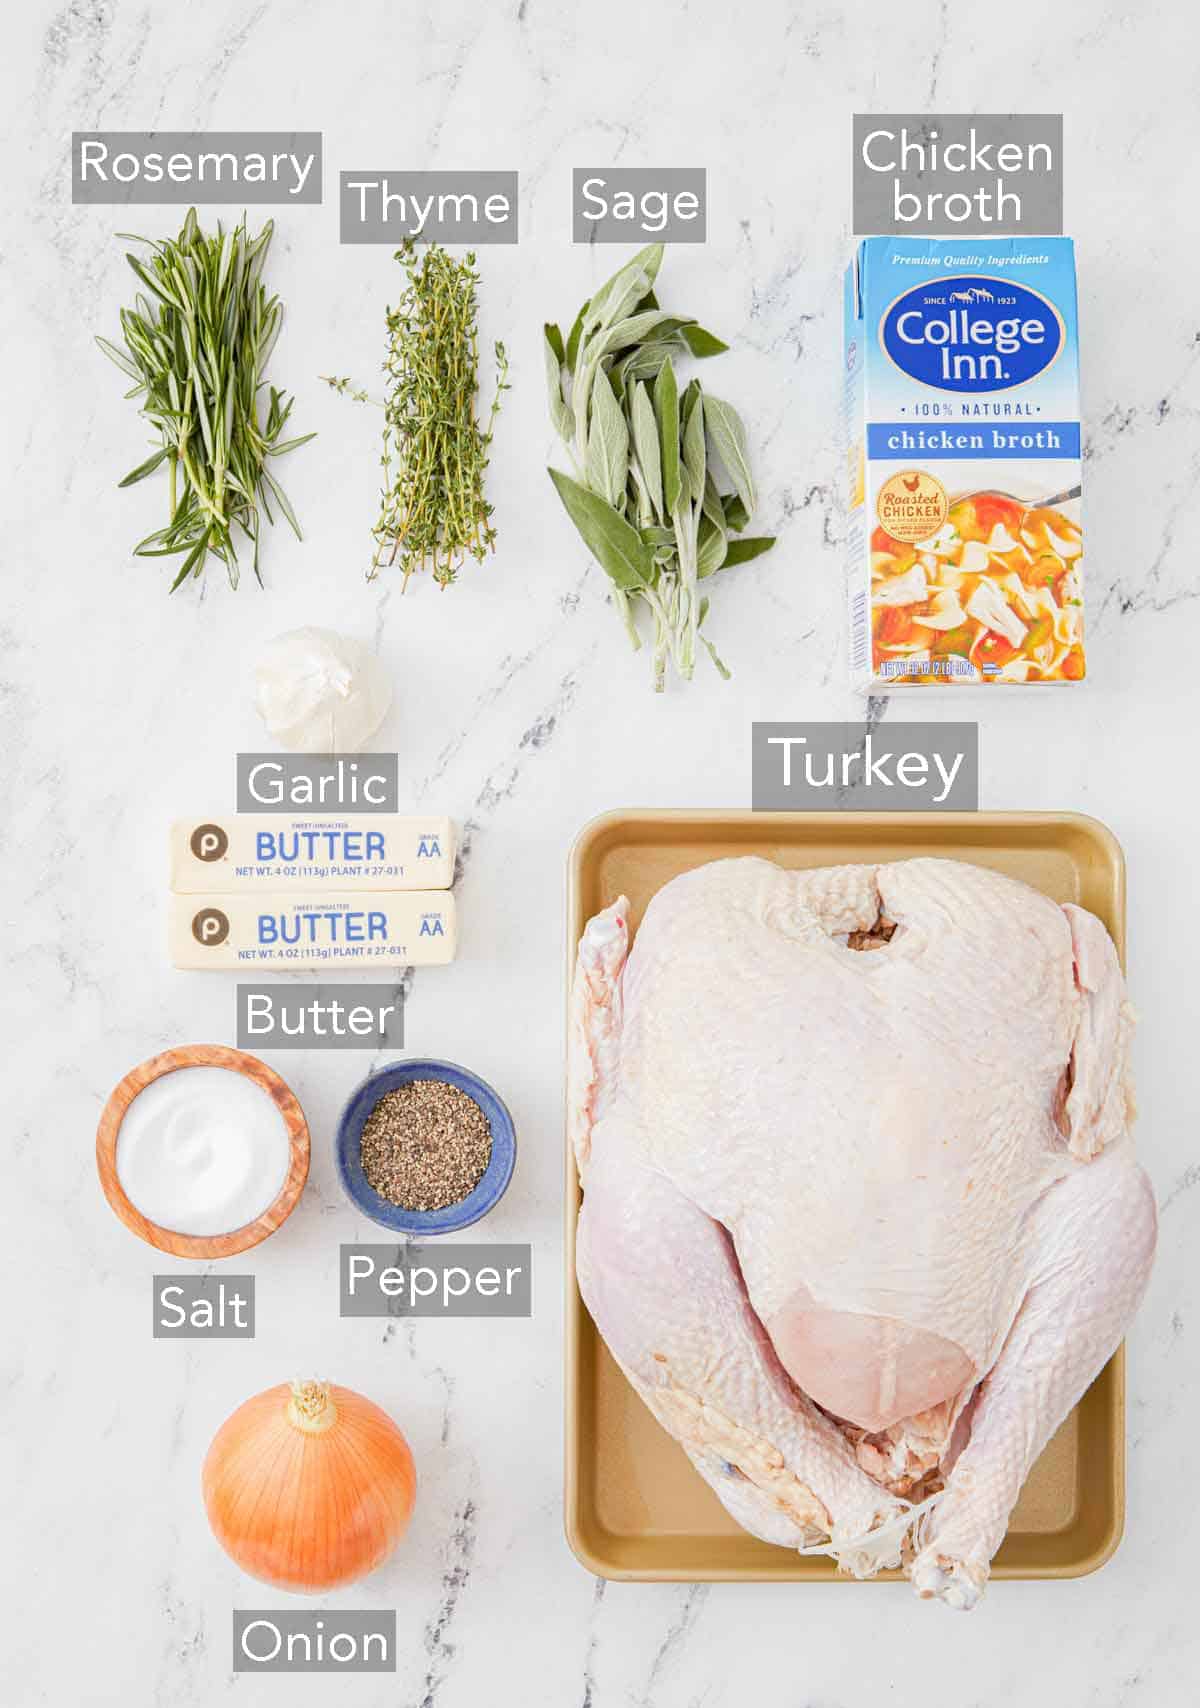 Ingredients needed to cook a turkey.